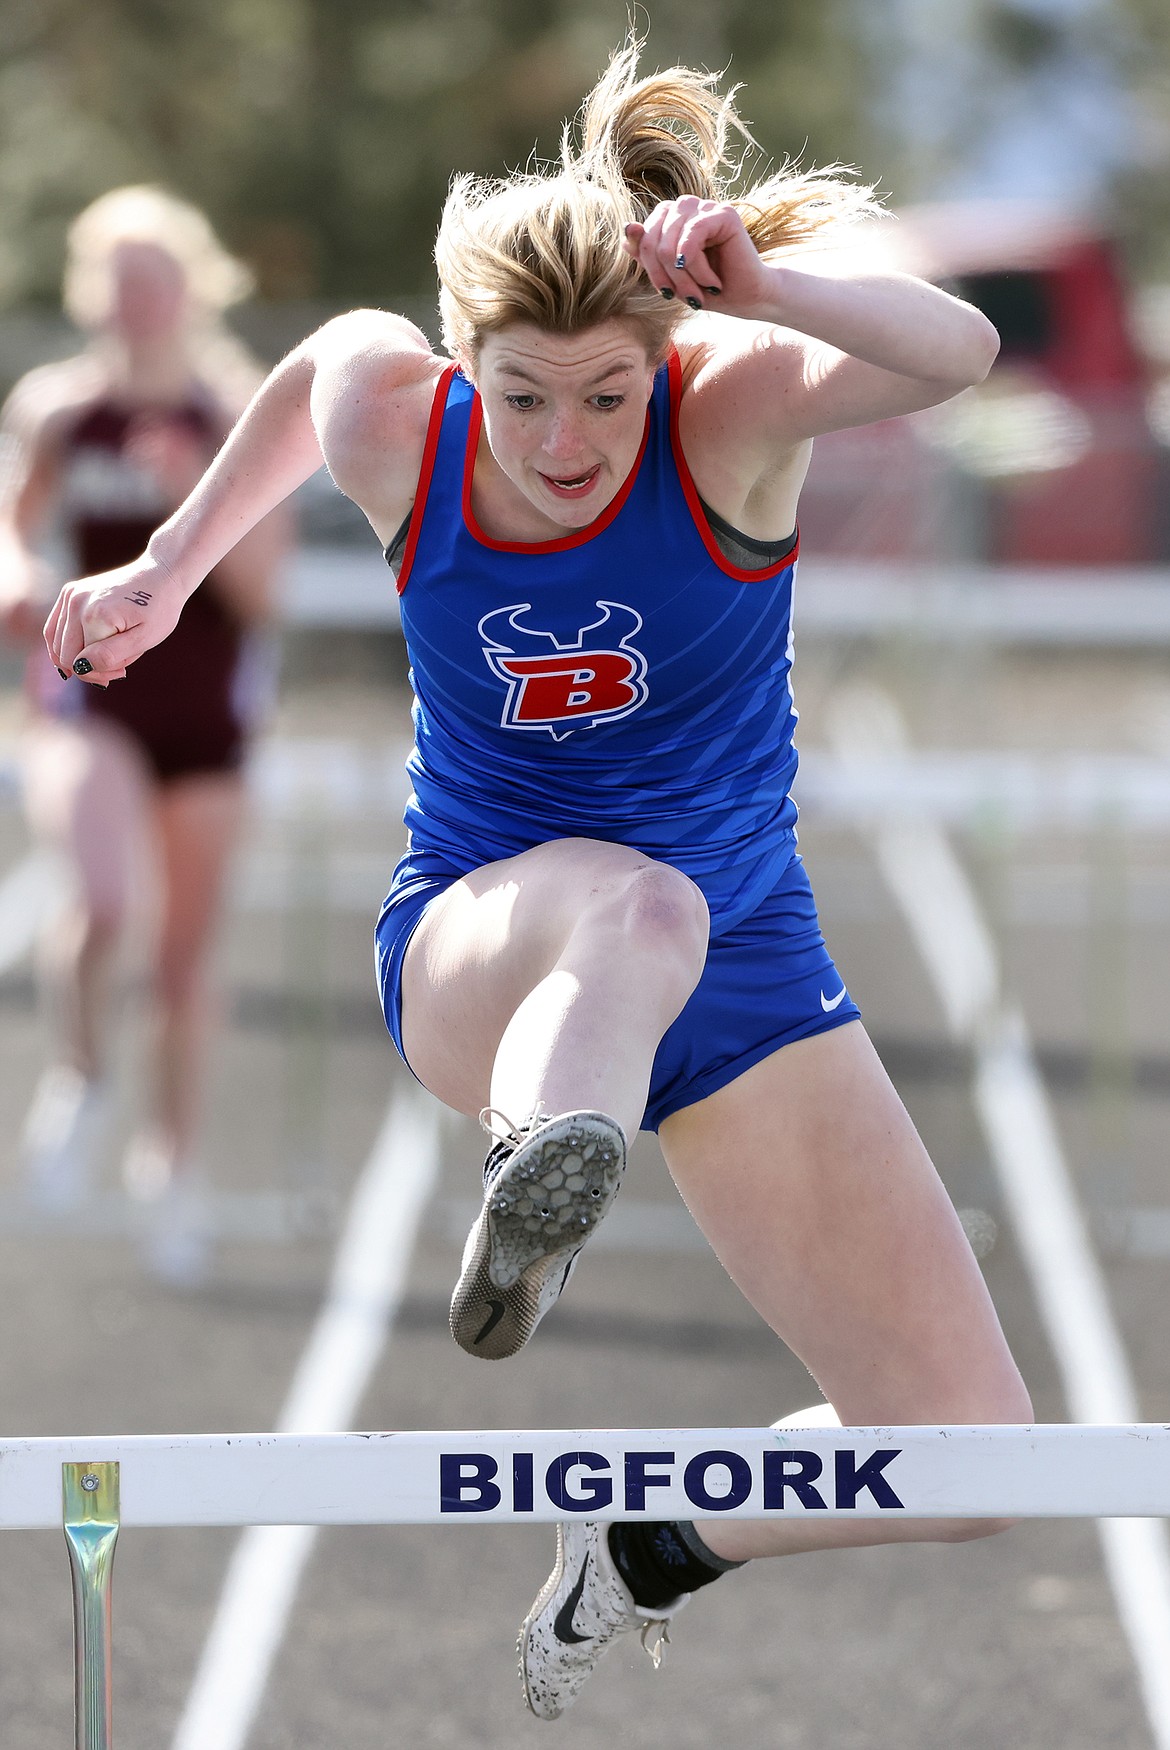 Bigfork’s Lily Tanko jumps in the 300 hurdles, where she finished second, at the Bigfork Invitational on Tuesday, April 19. (Jeremy Weber/Daily Inter Lake)